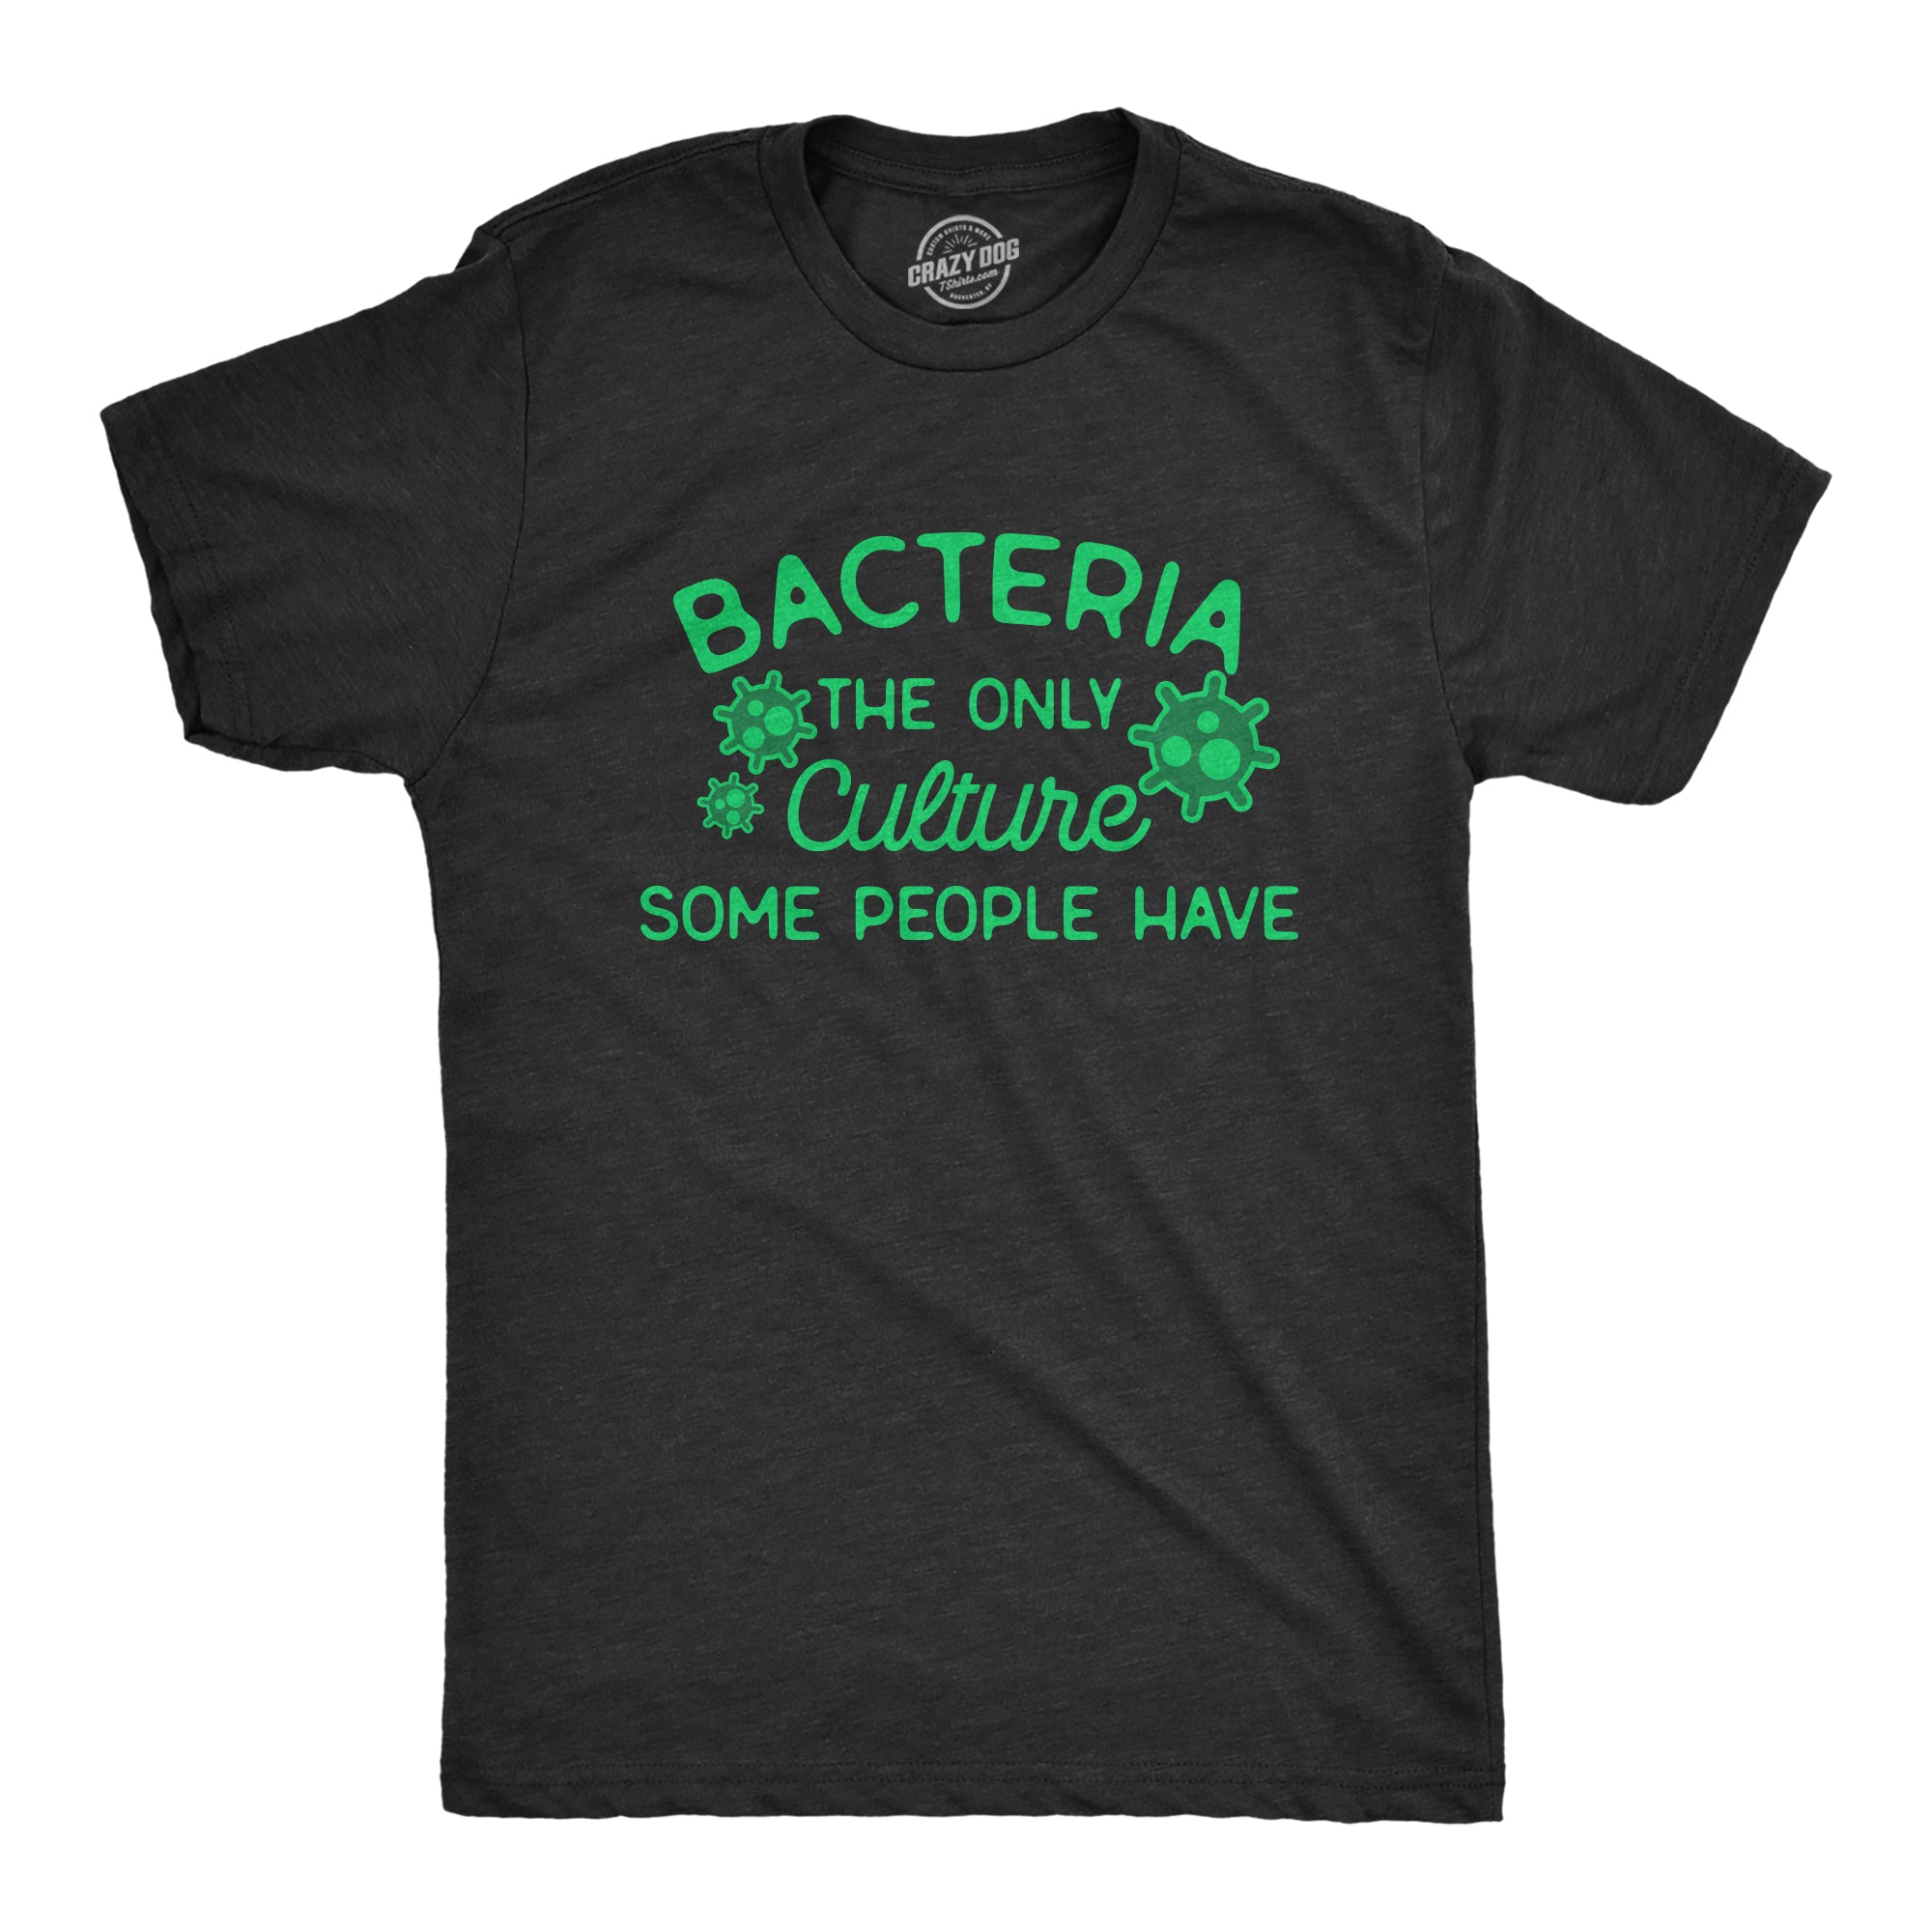 Funny Heather Black - BACTERIA Bacteria The Only Culture Some People Have Mens T Shirt Nerdy Sarcastic Tee